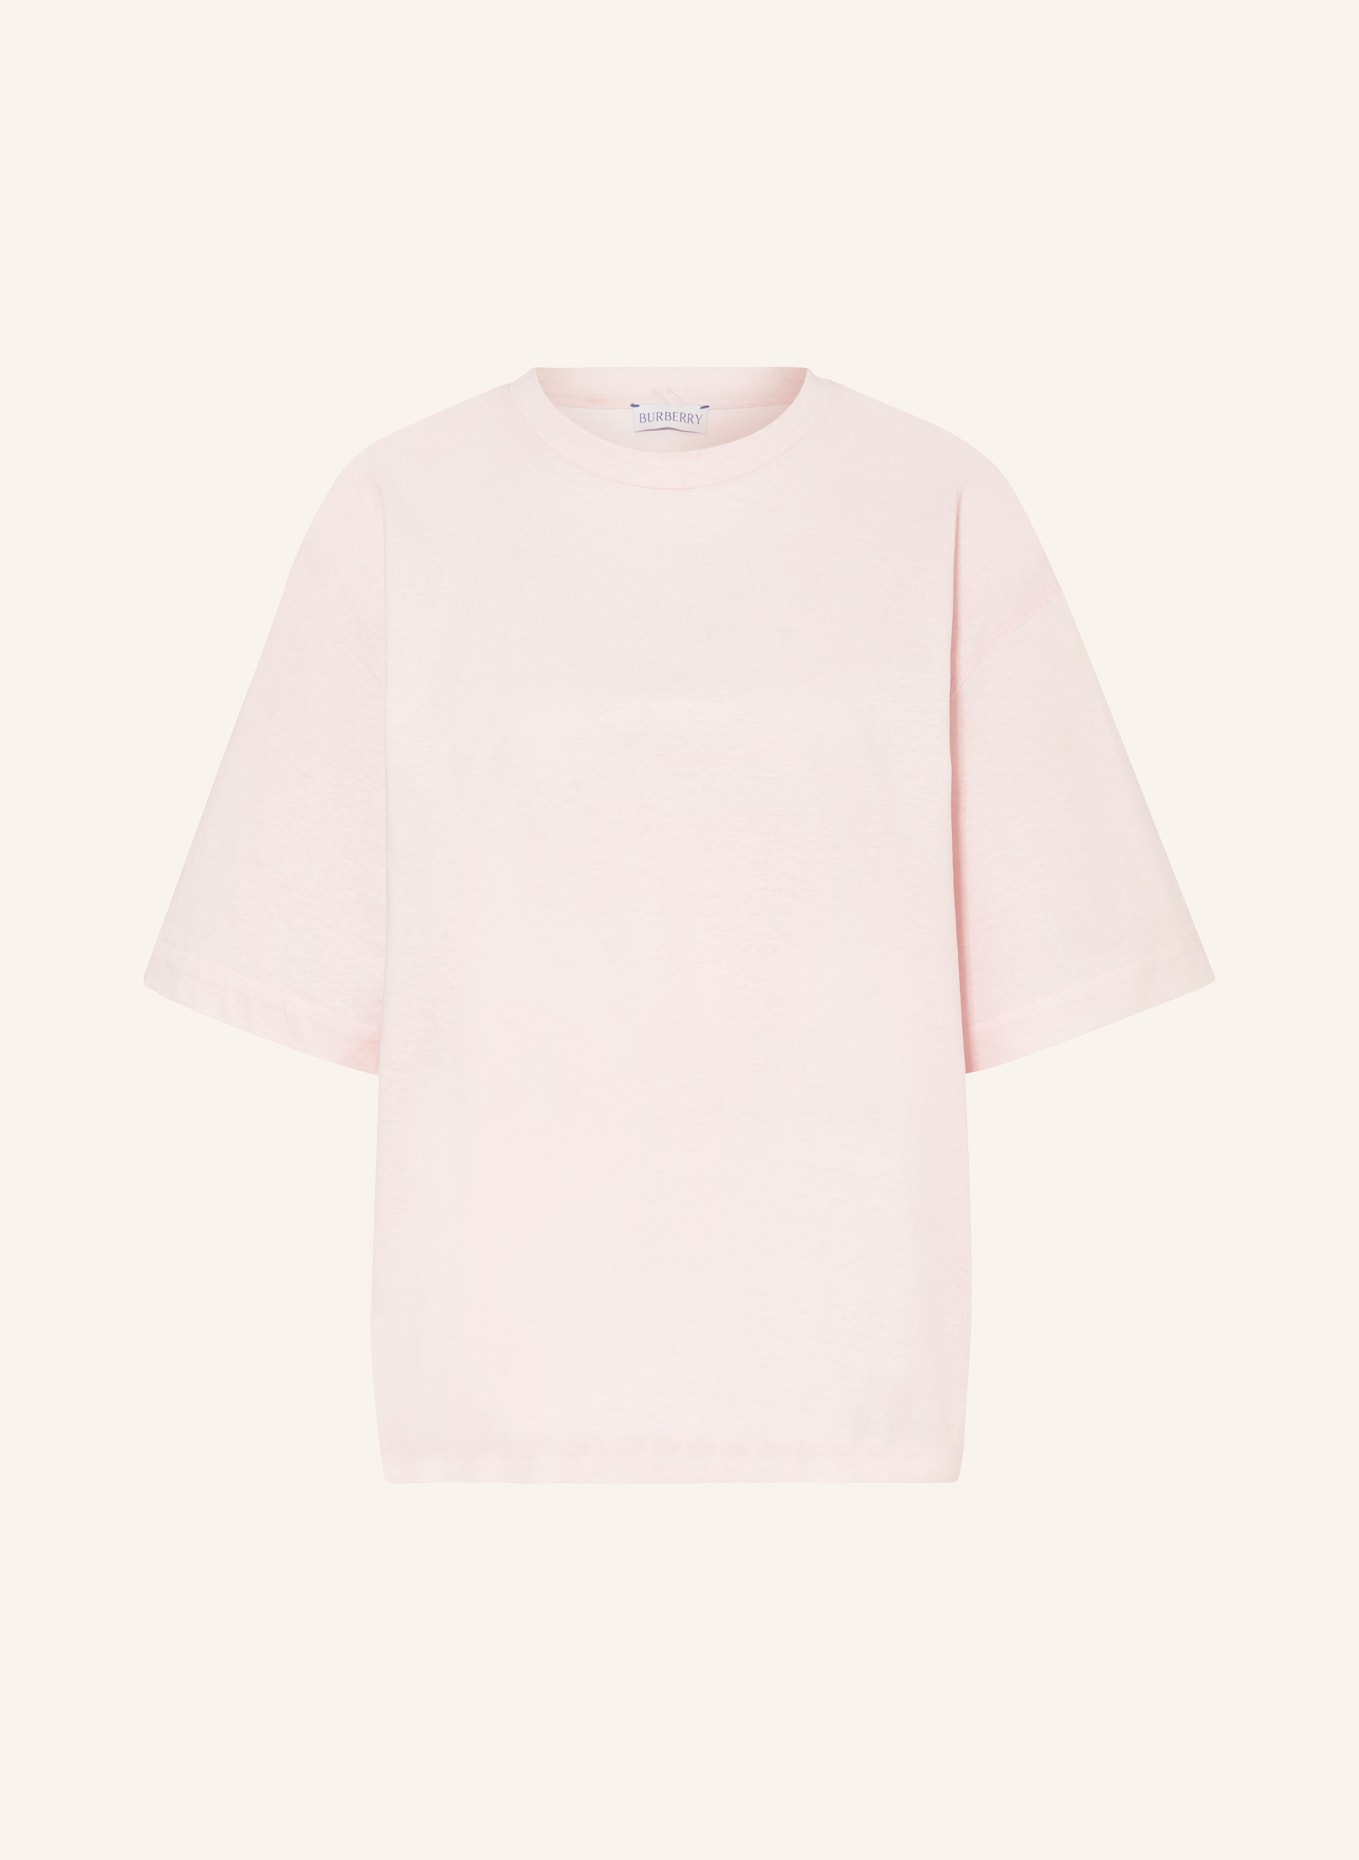 BURBERRY Cropped-Shirt MILLEPOINT, Farbe: ROSA (Bild 1)